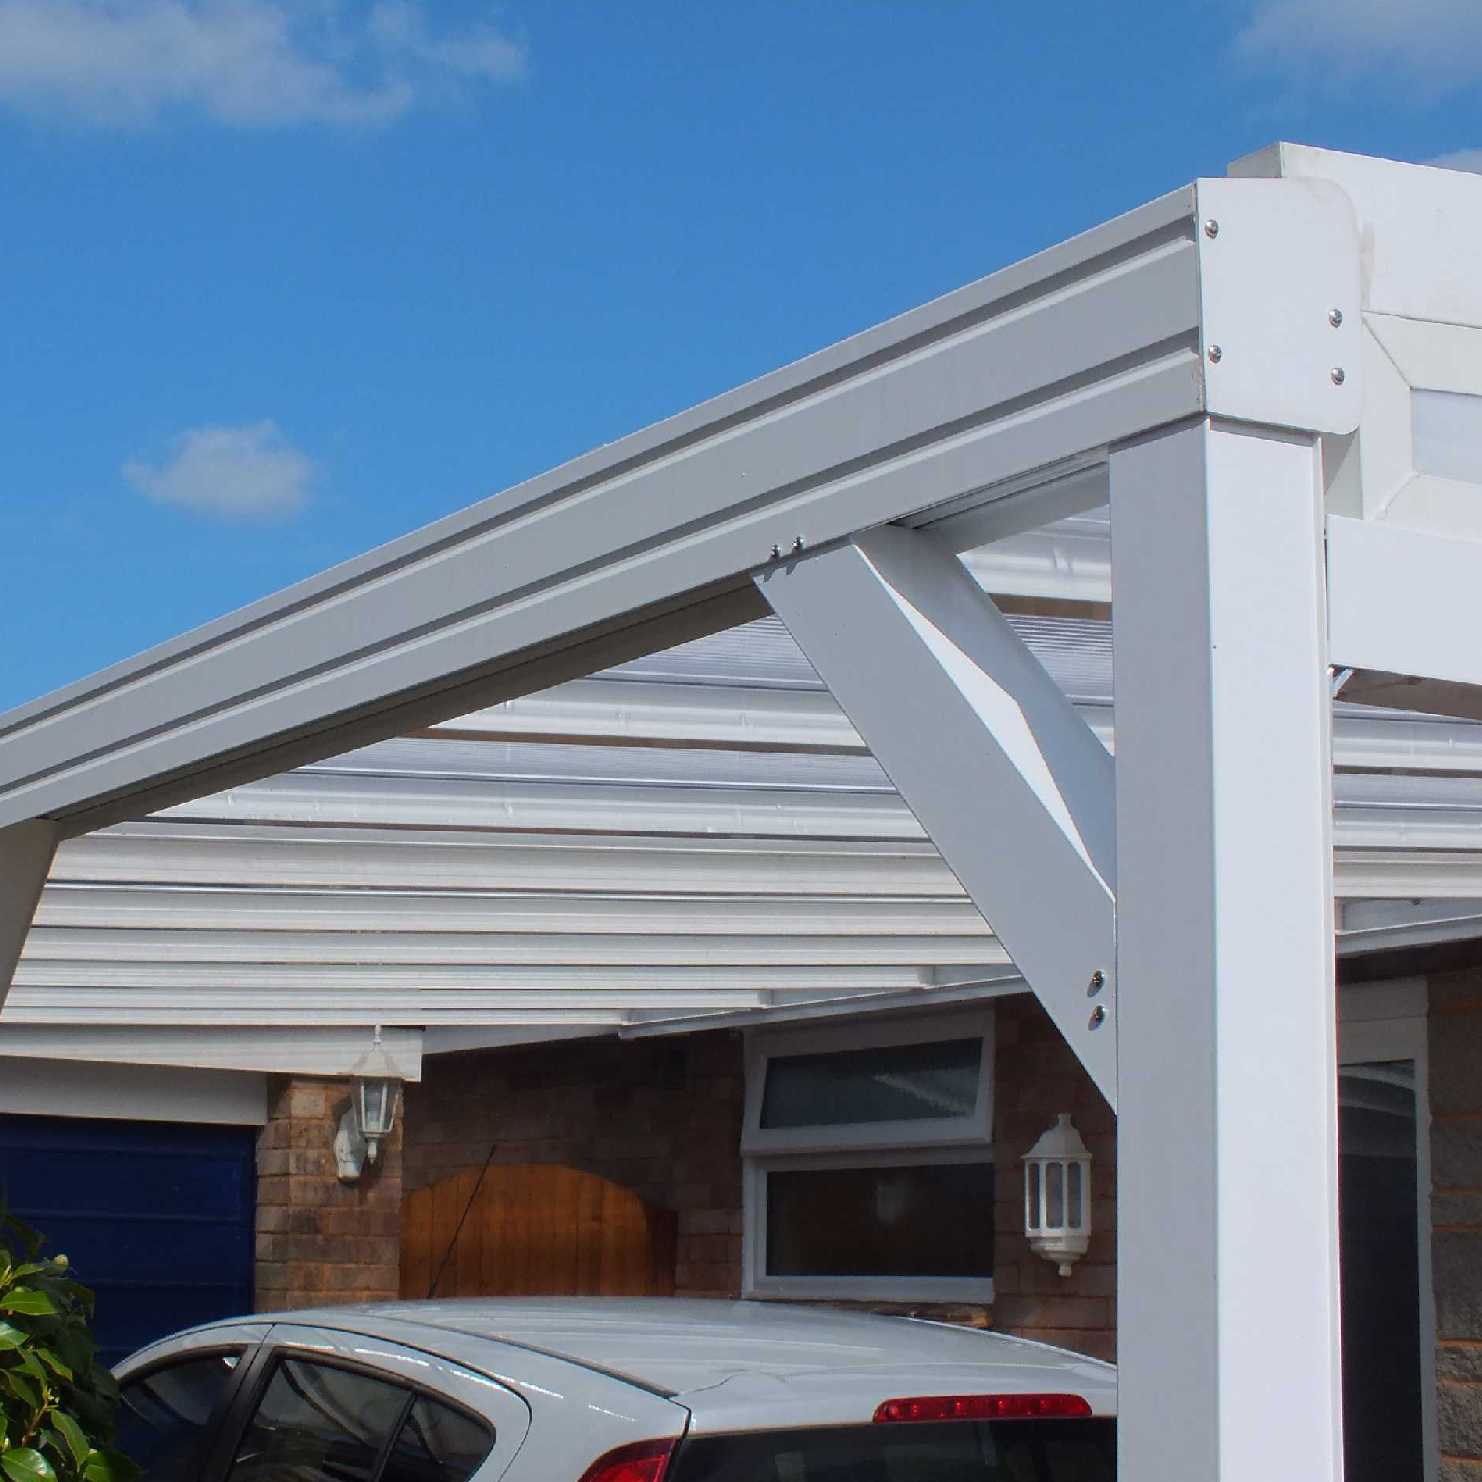 Buy Omega Smart Lean-To Canopy, White with 16mm Polycarbonate Glazing - 7.4m (W) x 4.5m (P), (4) Supporting Posts online today